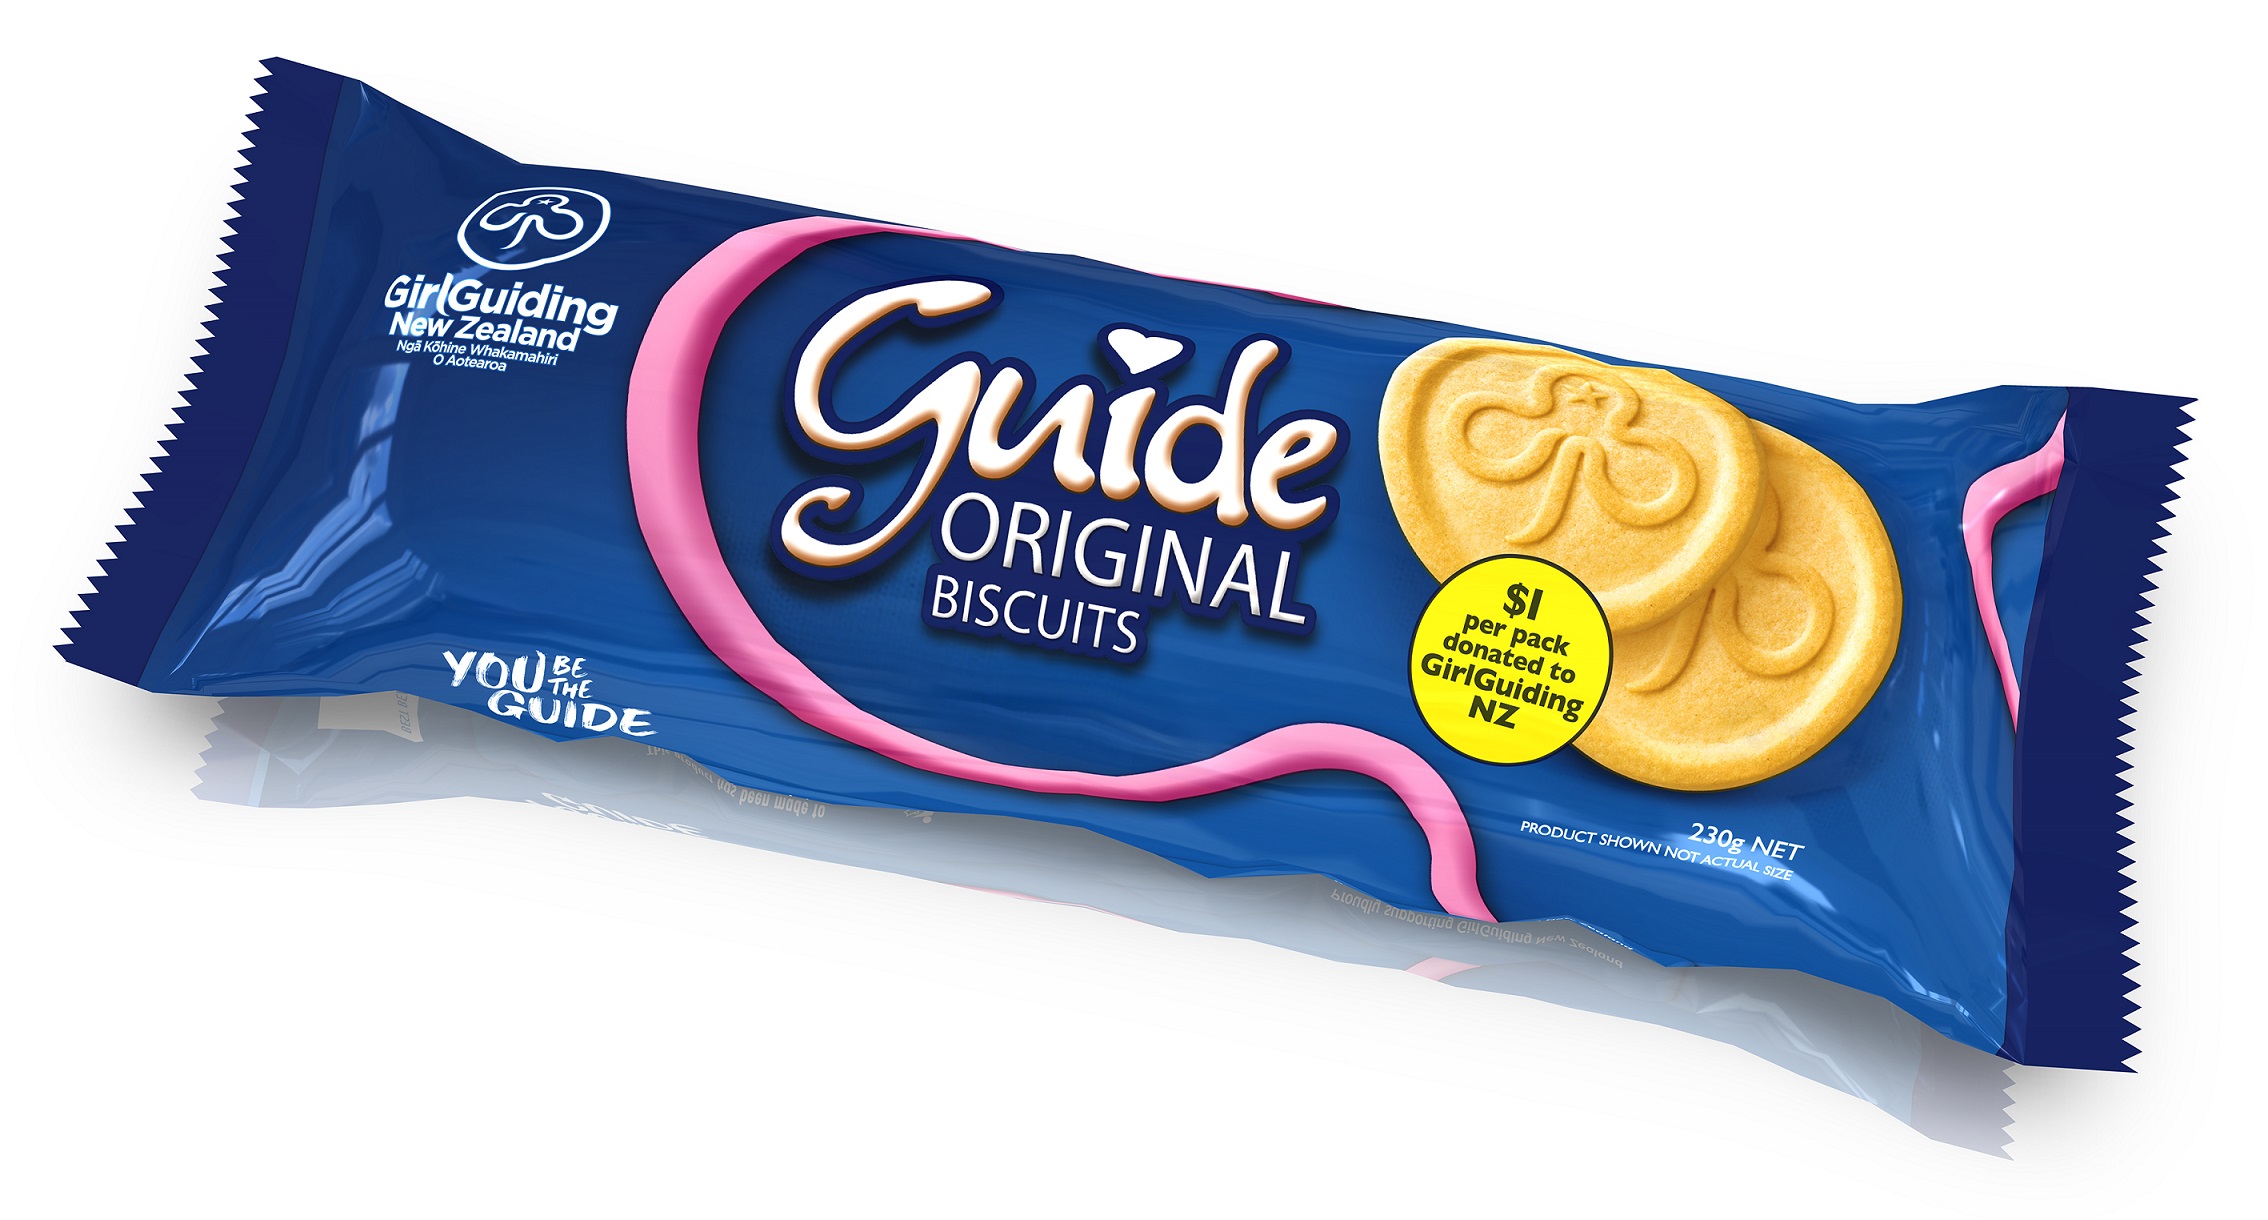 Close up of Guid biscuits packet